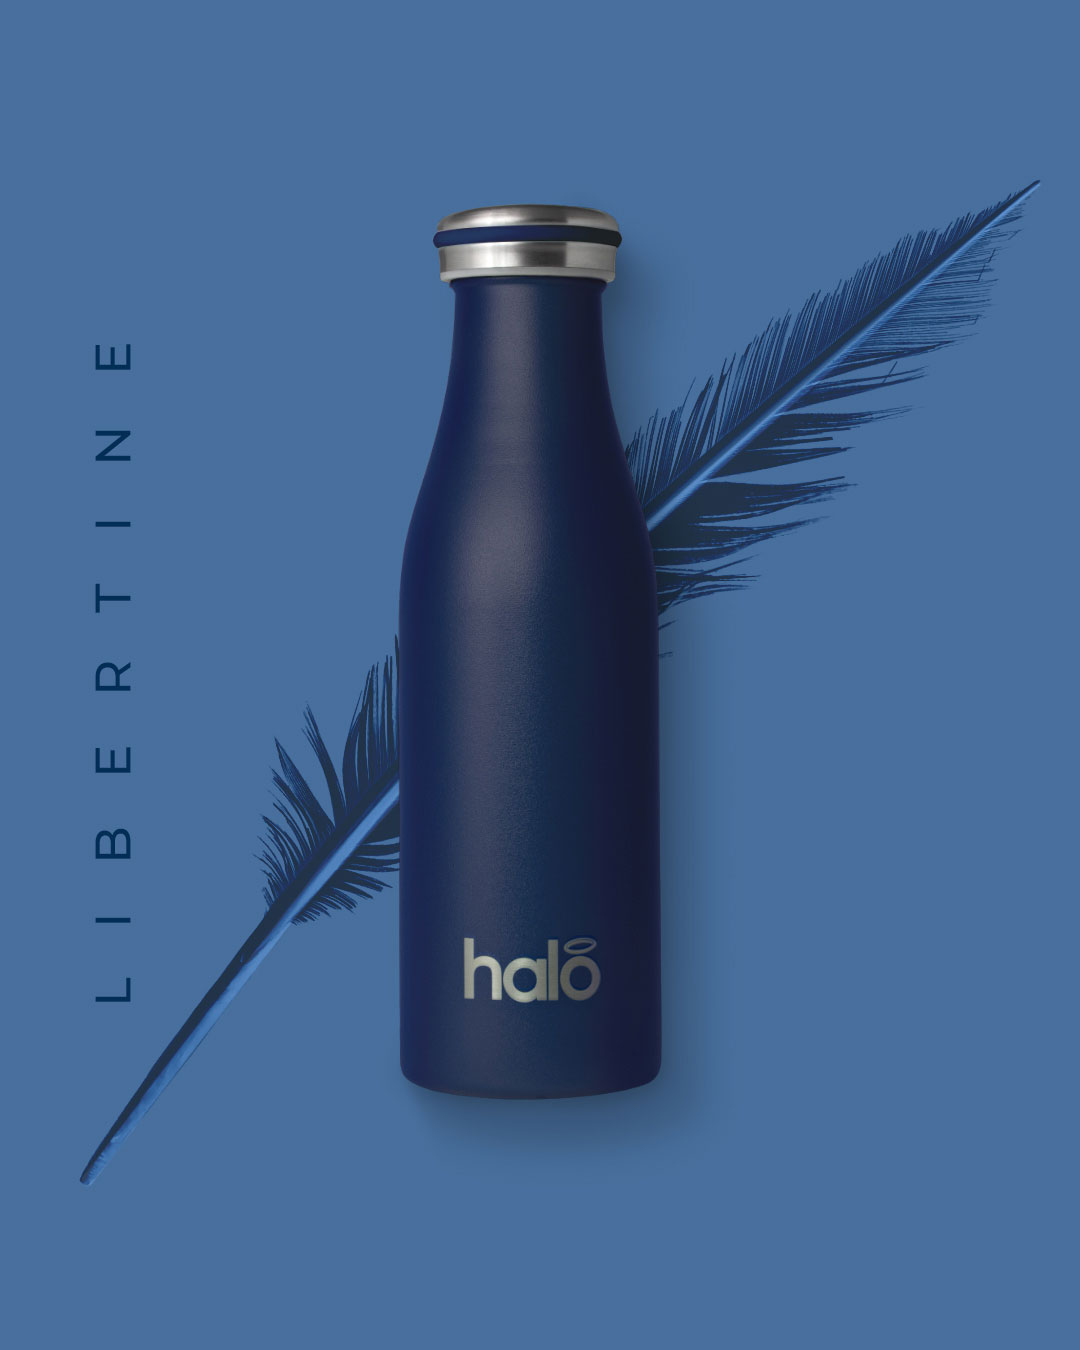 Halo Bottle 500ml navy blue reusable water bottle with feather.